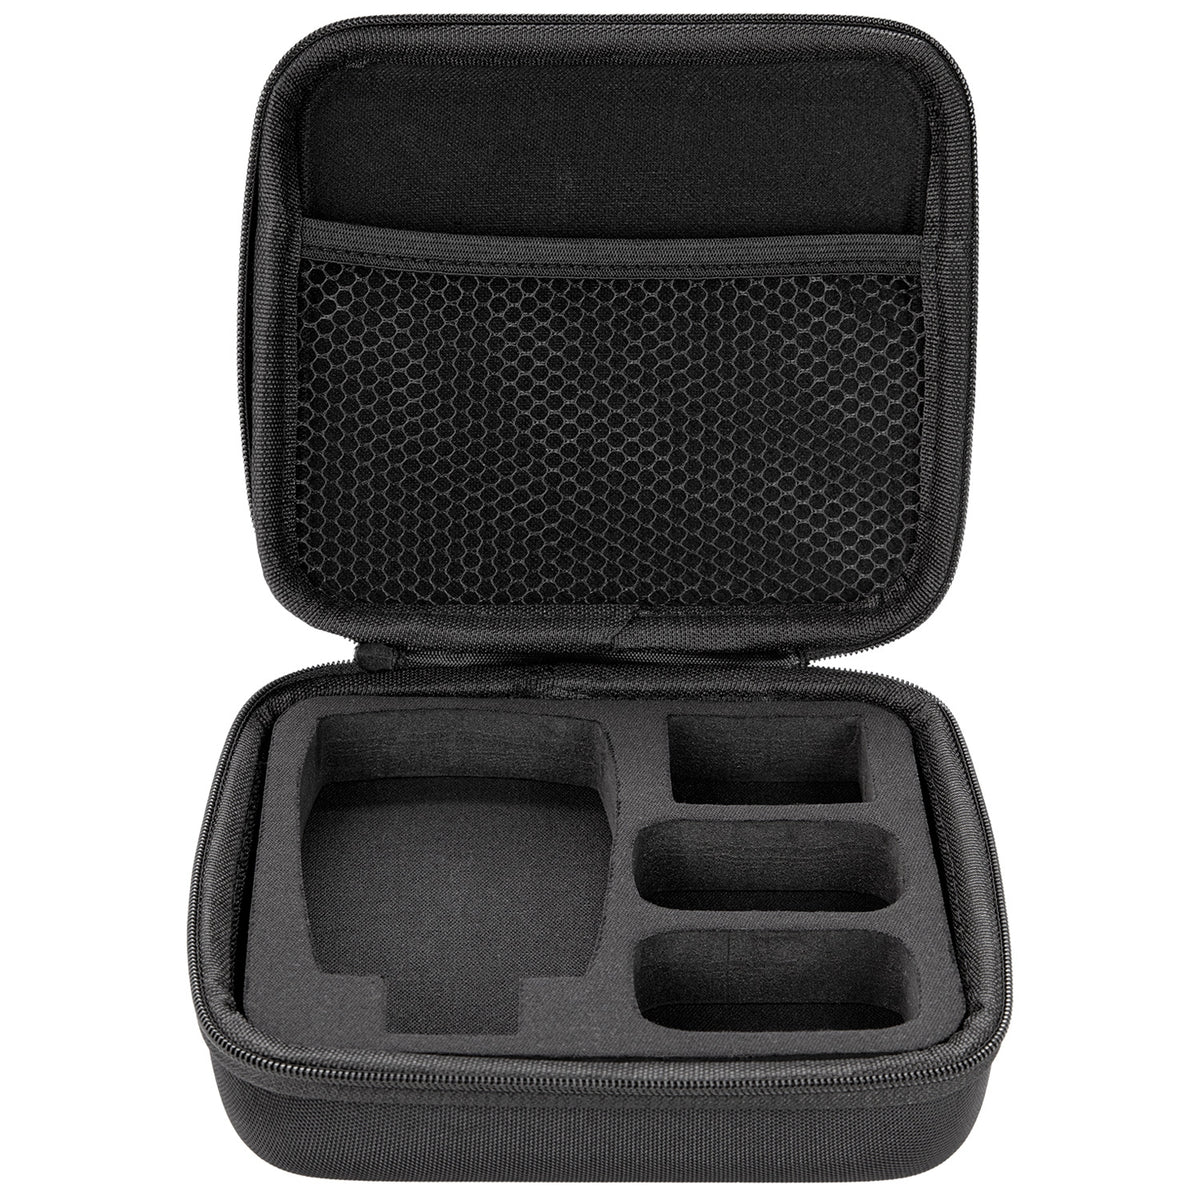 Hard Shell Case for FJ Wireless Triggers and FJ-XR Receivers